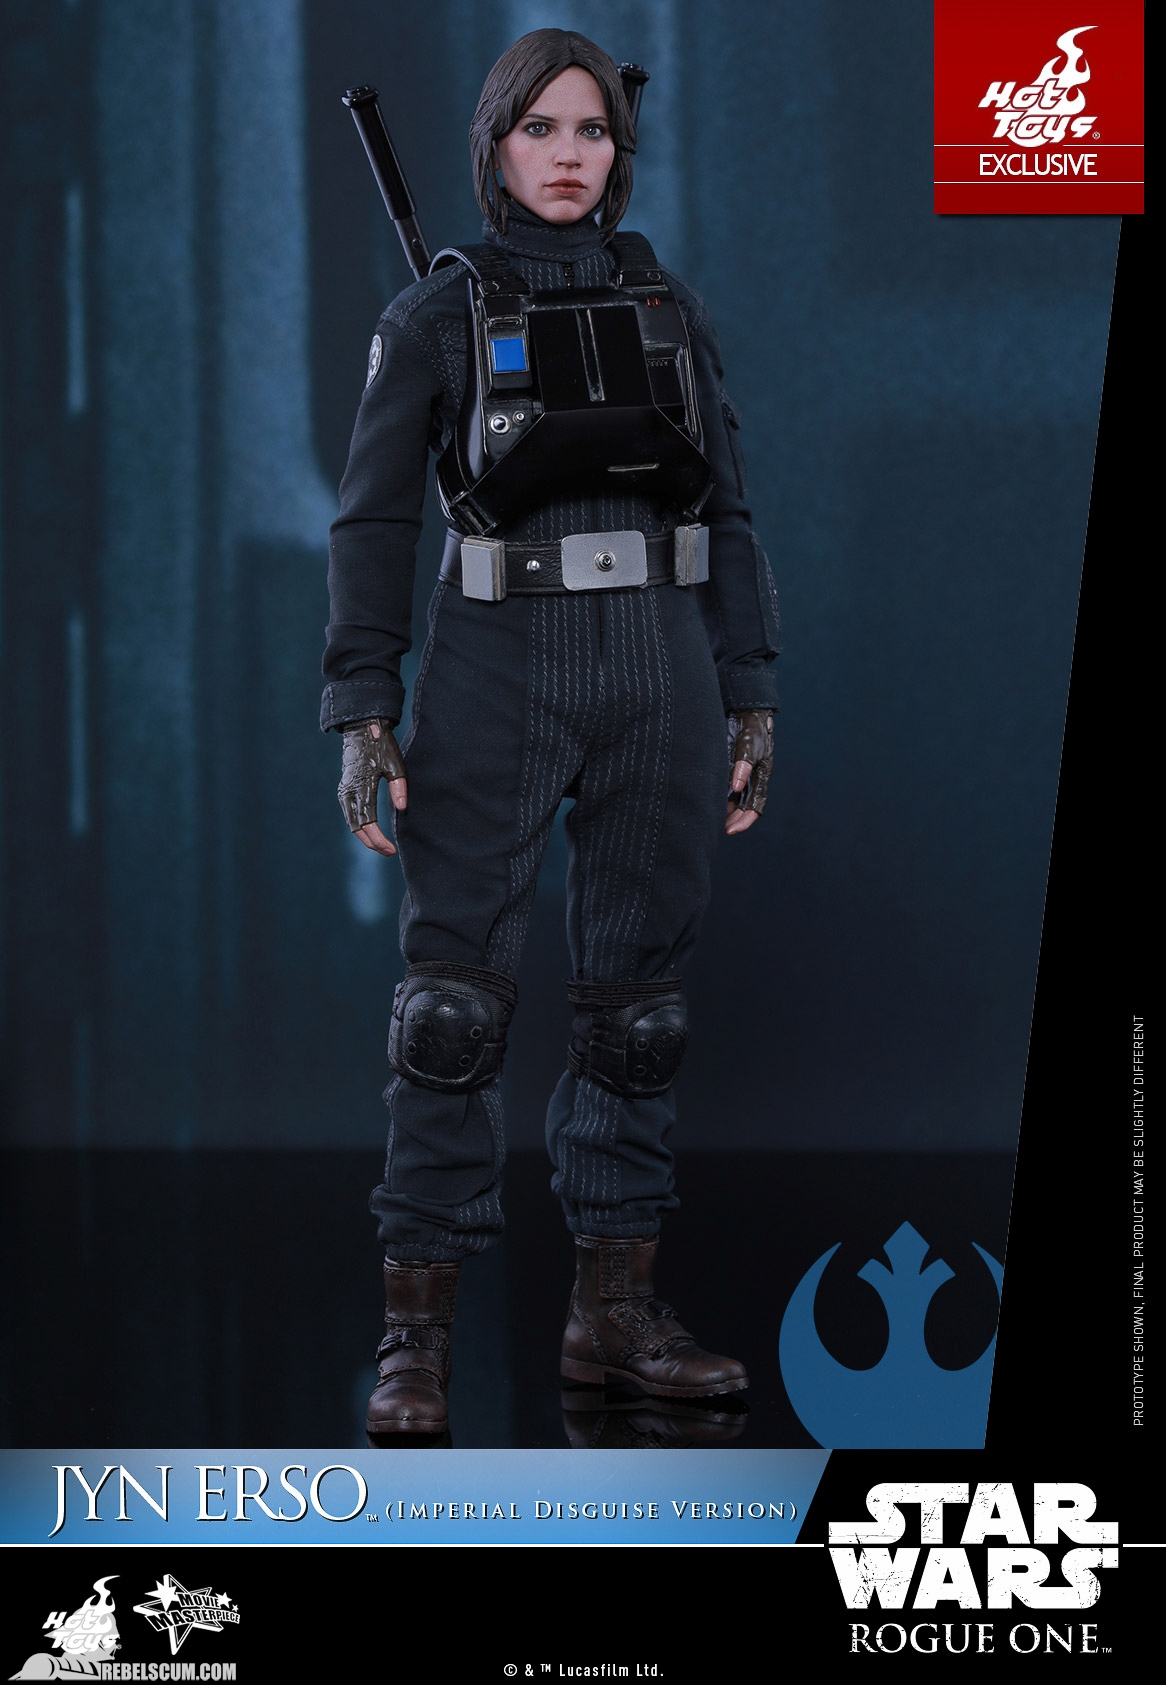 Hot-Toys-MMS419-Rogue-One-Jyn-Erso-Imperial-Disguise-002.jpg